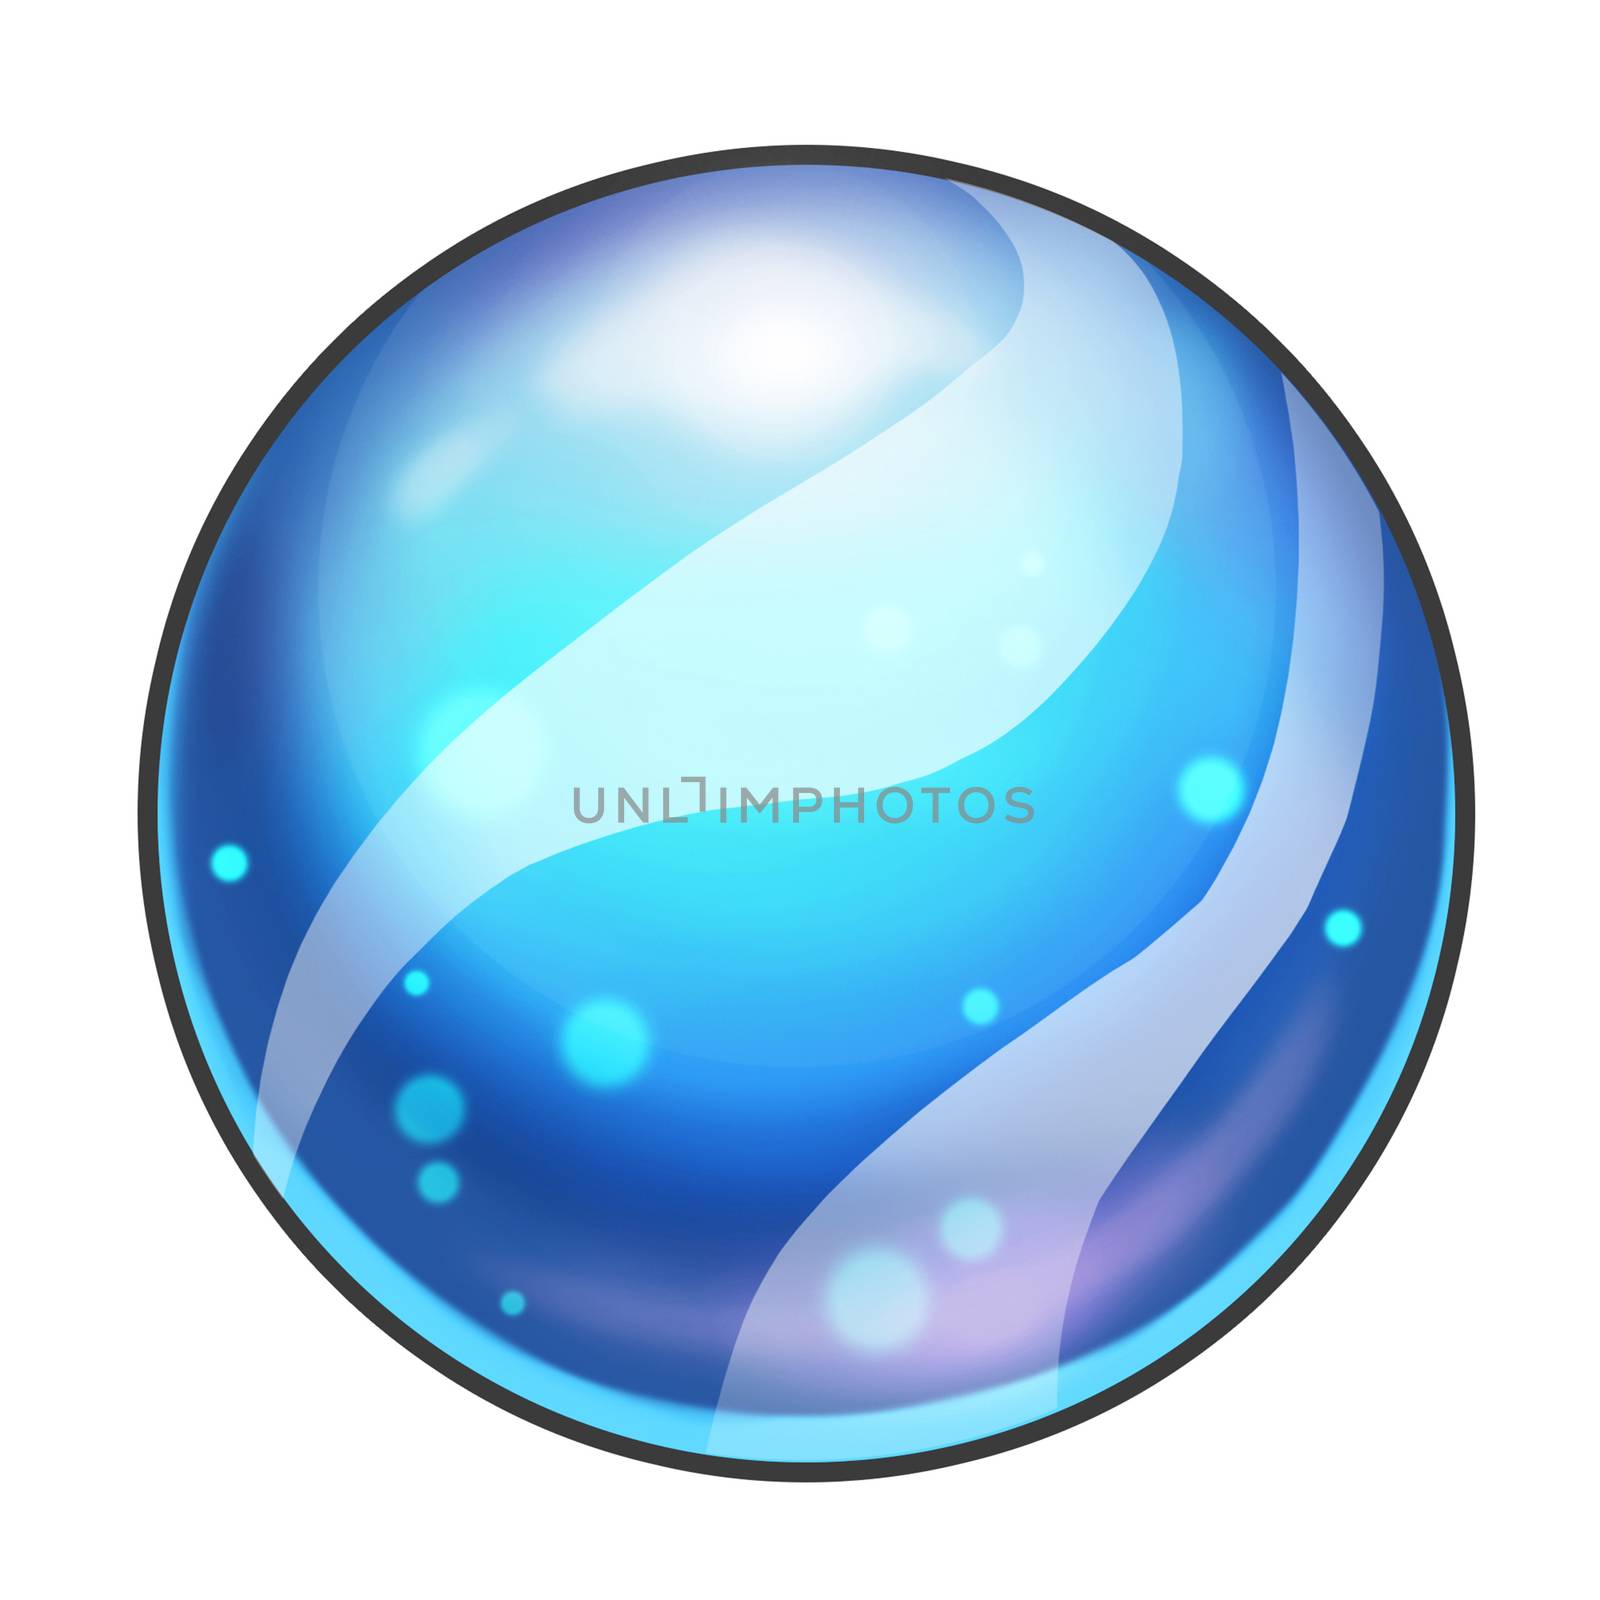 Illustration: Element Design: All Kinds of Marbles with Different Colors. Realistic Cartoon Life Style. Game Asset / UI Design.